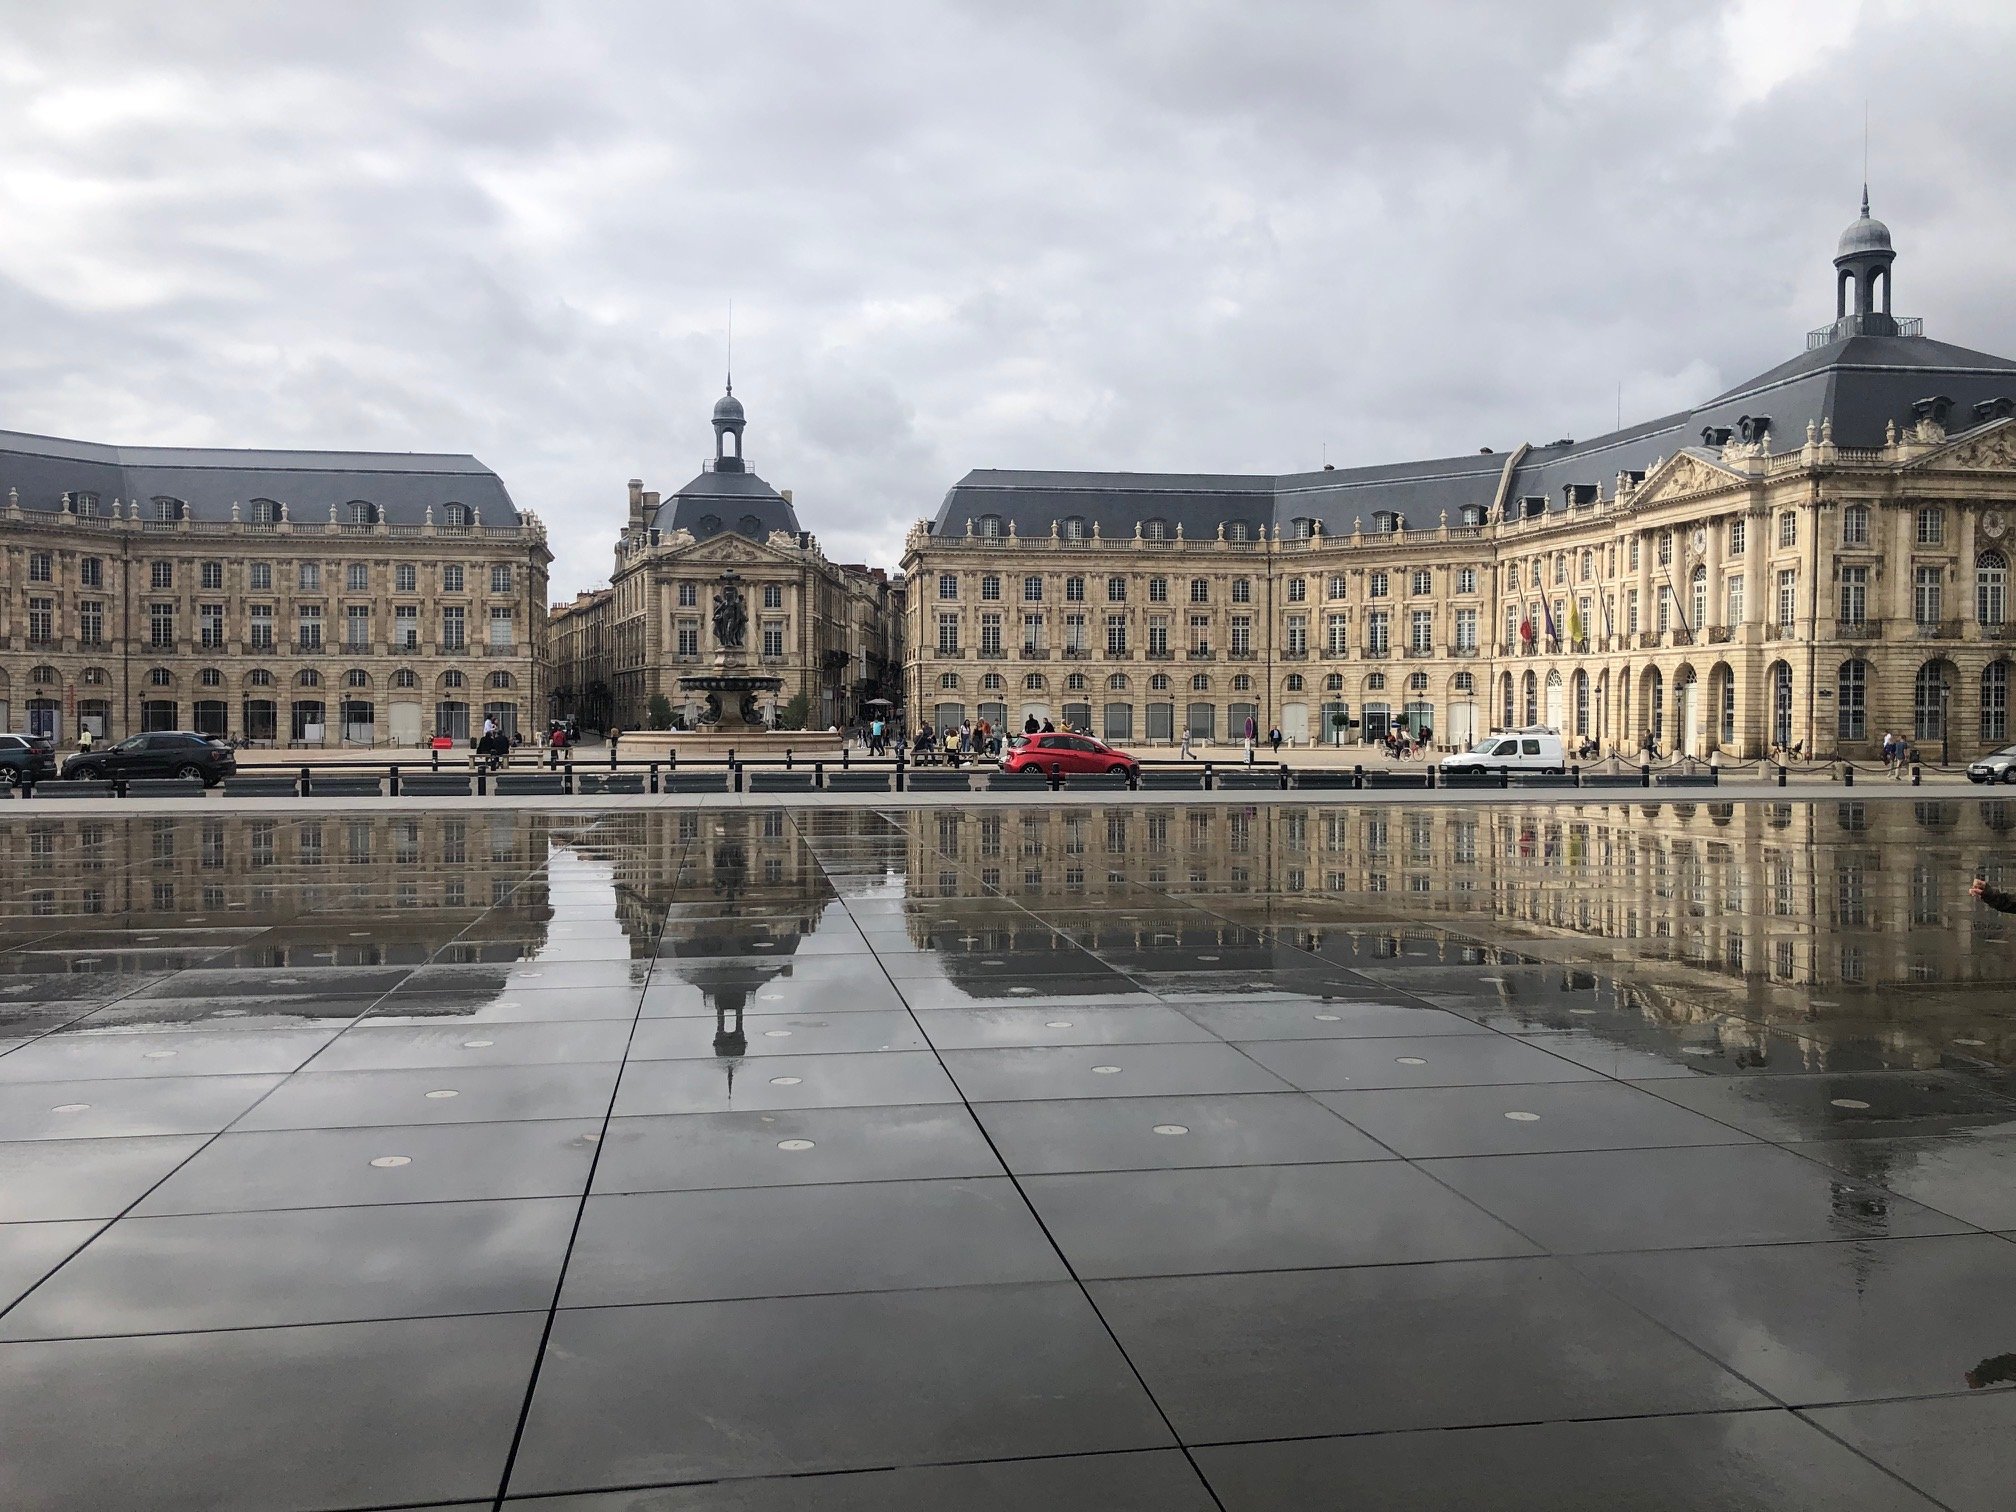  The Miroir d'eau (Water Mirror) in Bordeaux is the world's largest reflecting pool, covering 3,450 square metres (37,100 sq ft). It is located on the quay of the Garonne in front of the Place de la Bourse. It wasn’t a great day for reflections.  